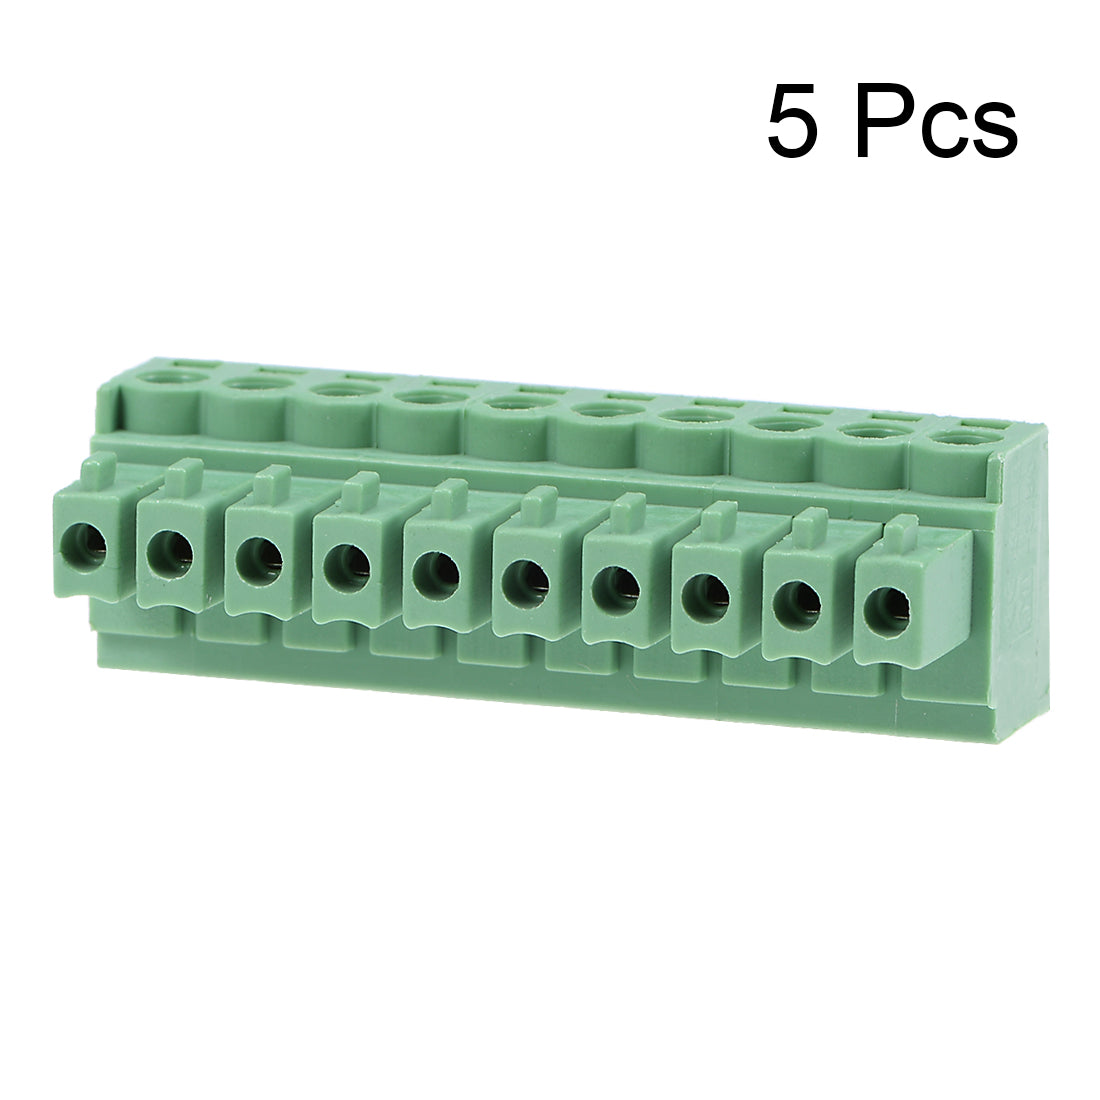 uxcell Uxcell 5Pcs AC300V 8A 3.5mm Pitch 10P Needle Seat Insert-In PCB Terminal Block green